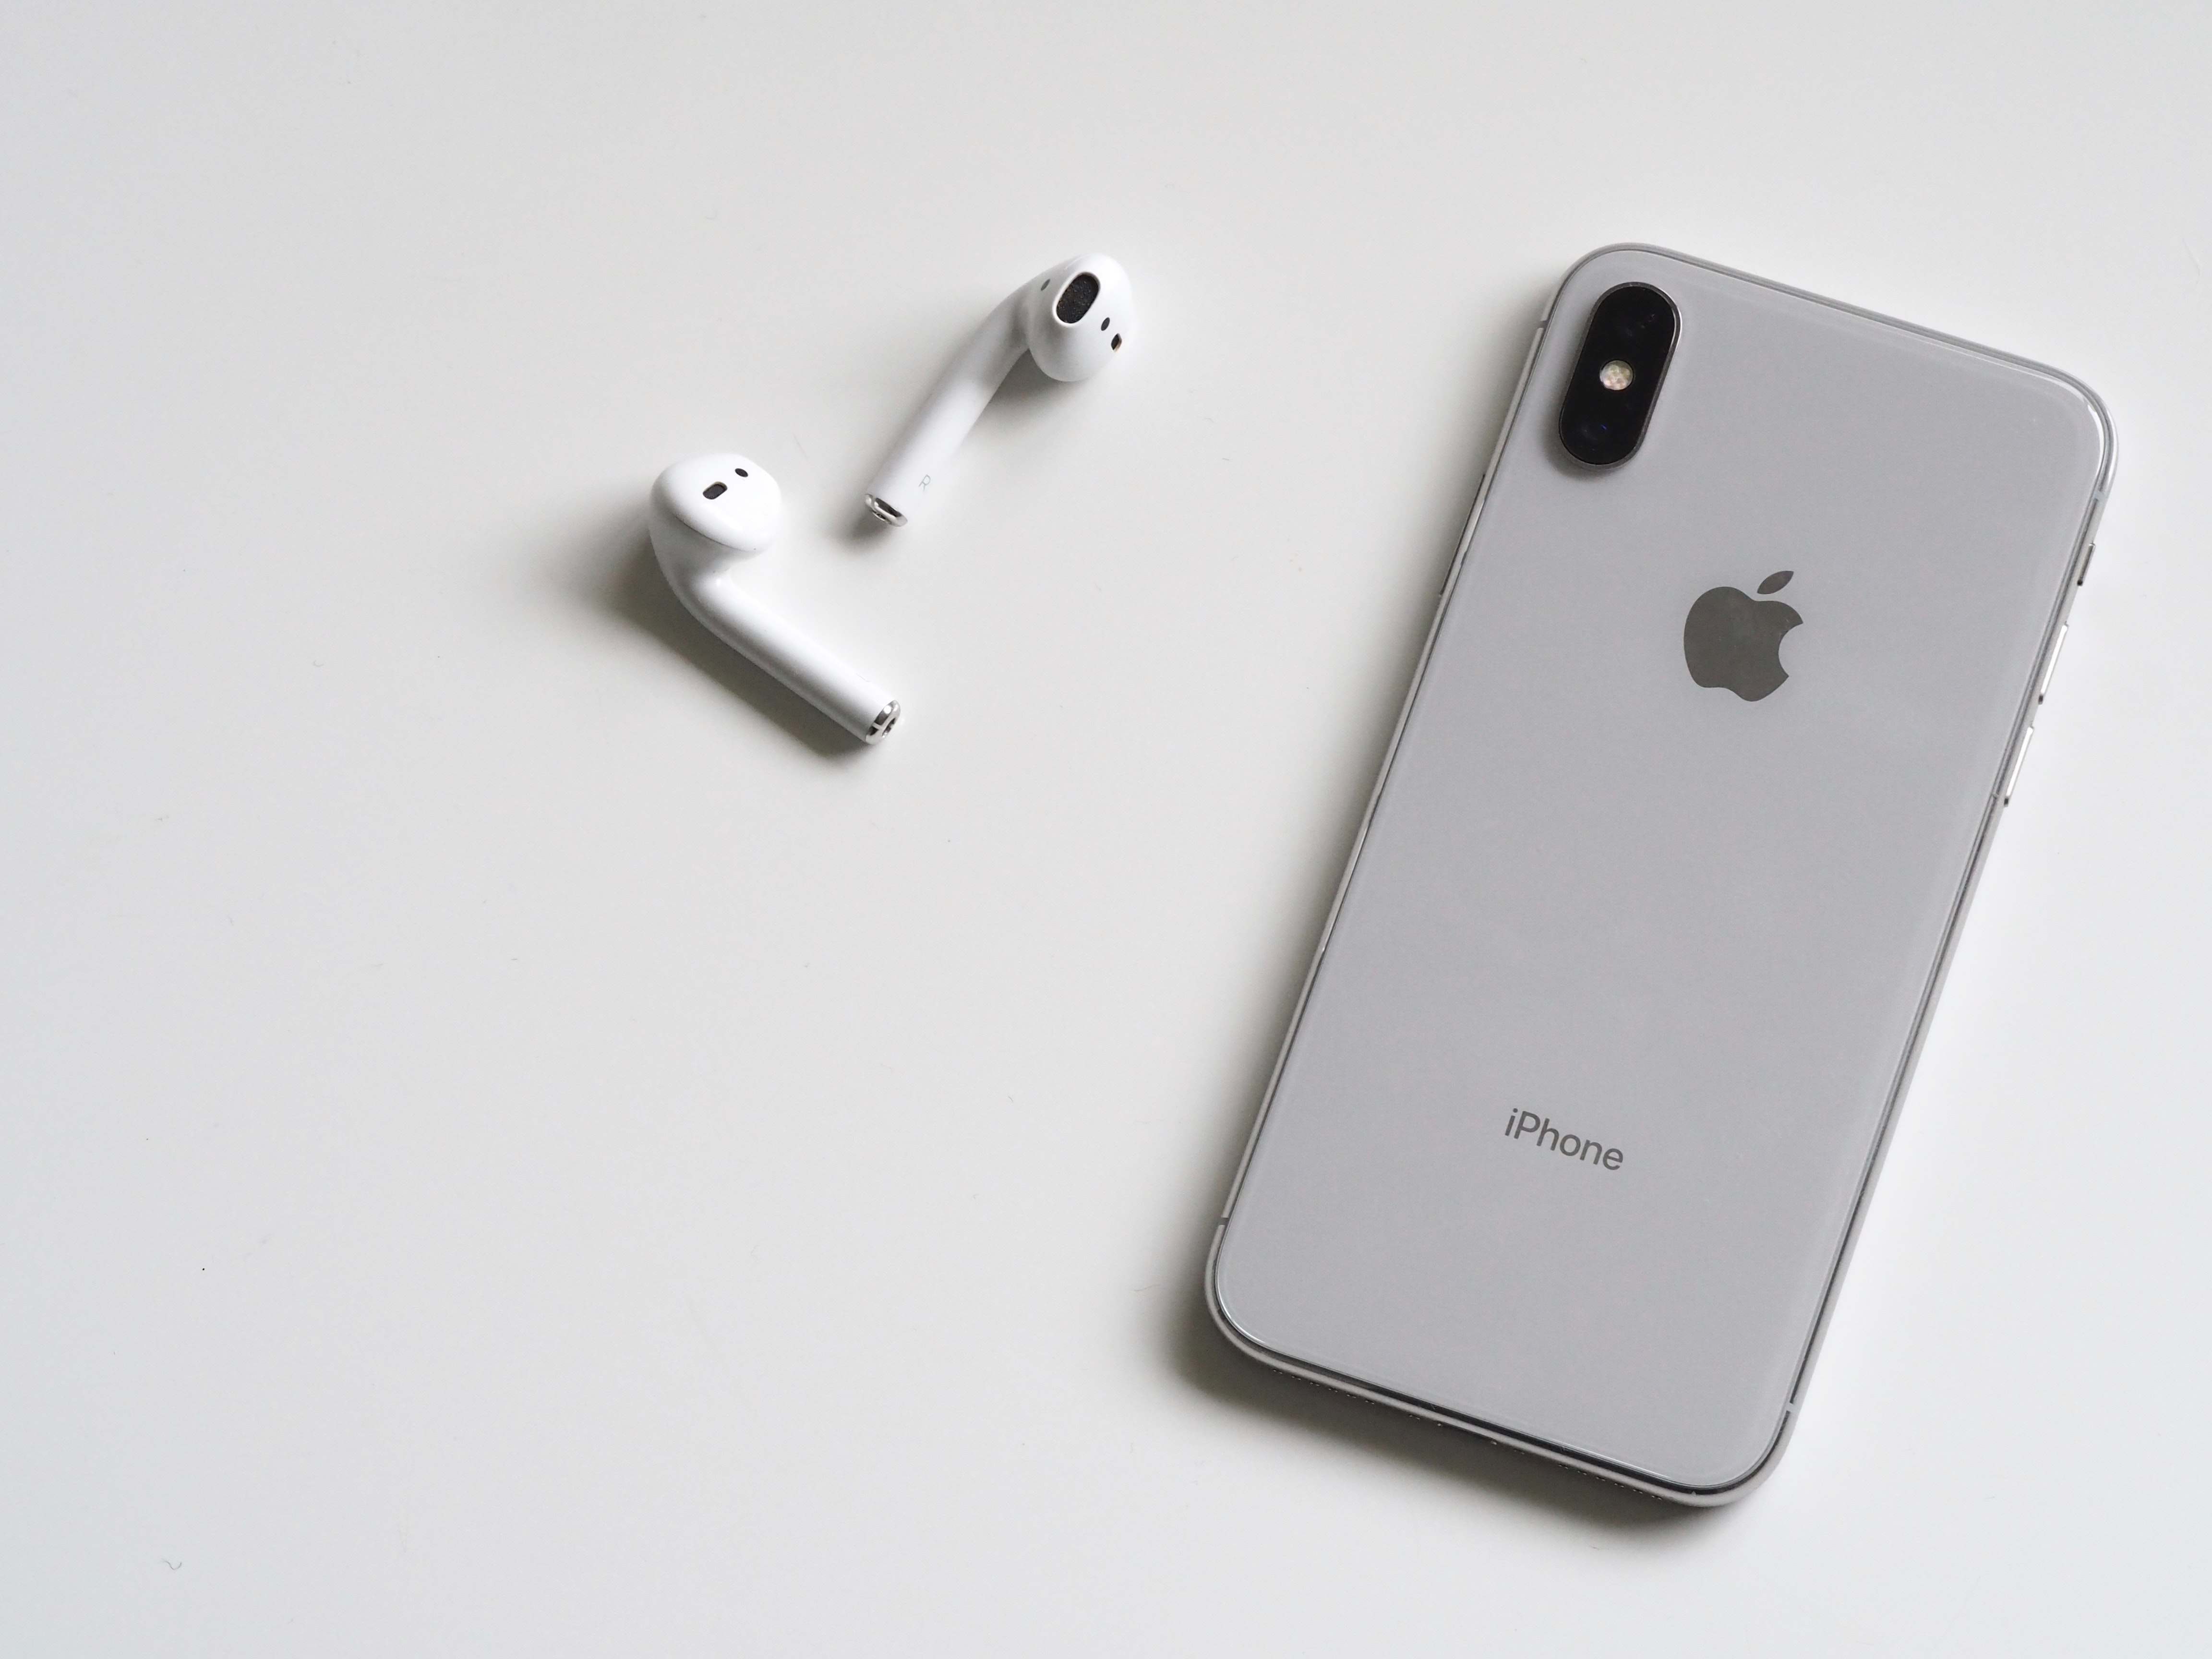 images/news/2019/airpods-apple-device-cellphone